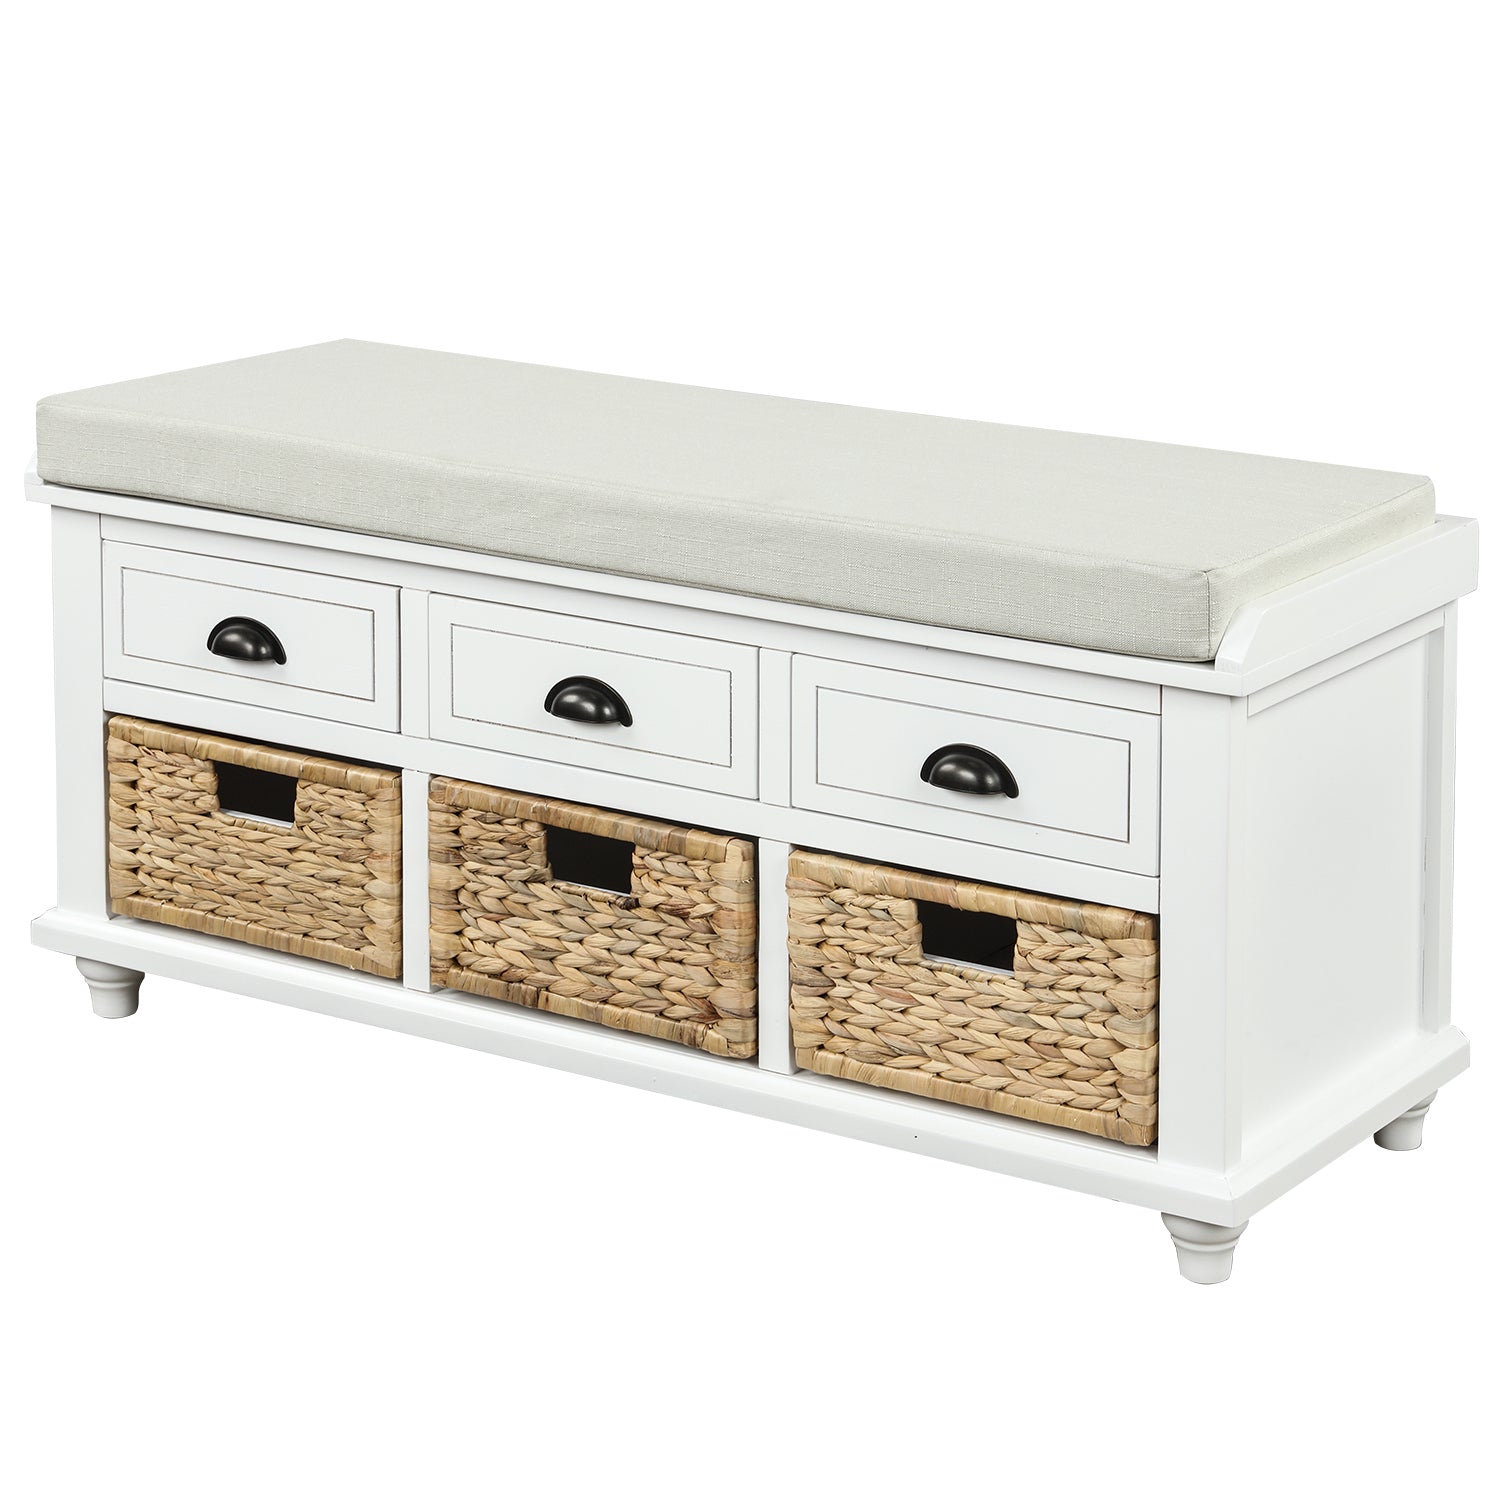 TREXM Rustic Storage Bench with 3 Drawers and 3 Rattan Baskets - White